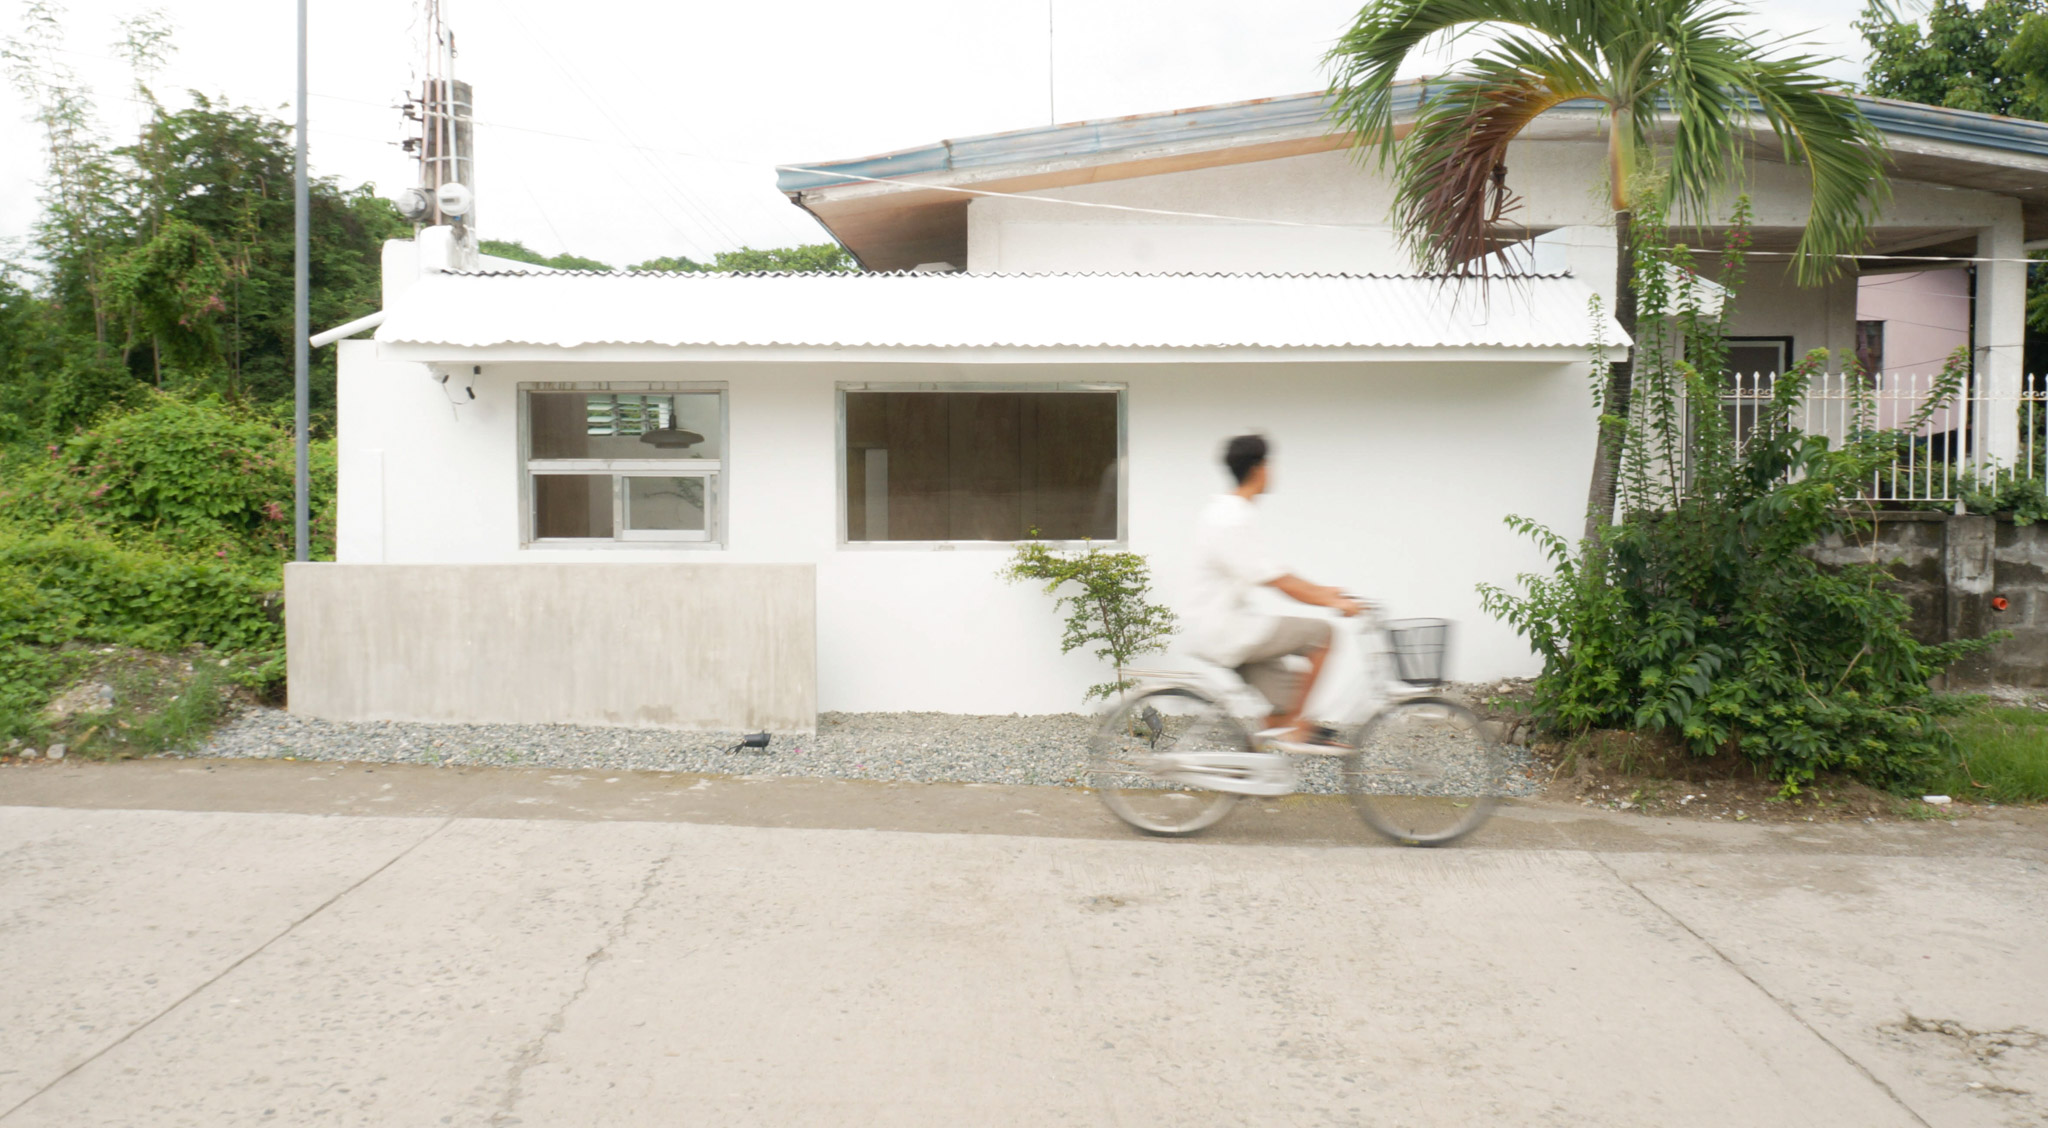 The outside of tiny house with an all white facade and person riding past in a bicycle.